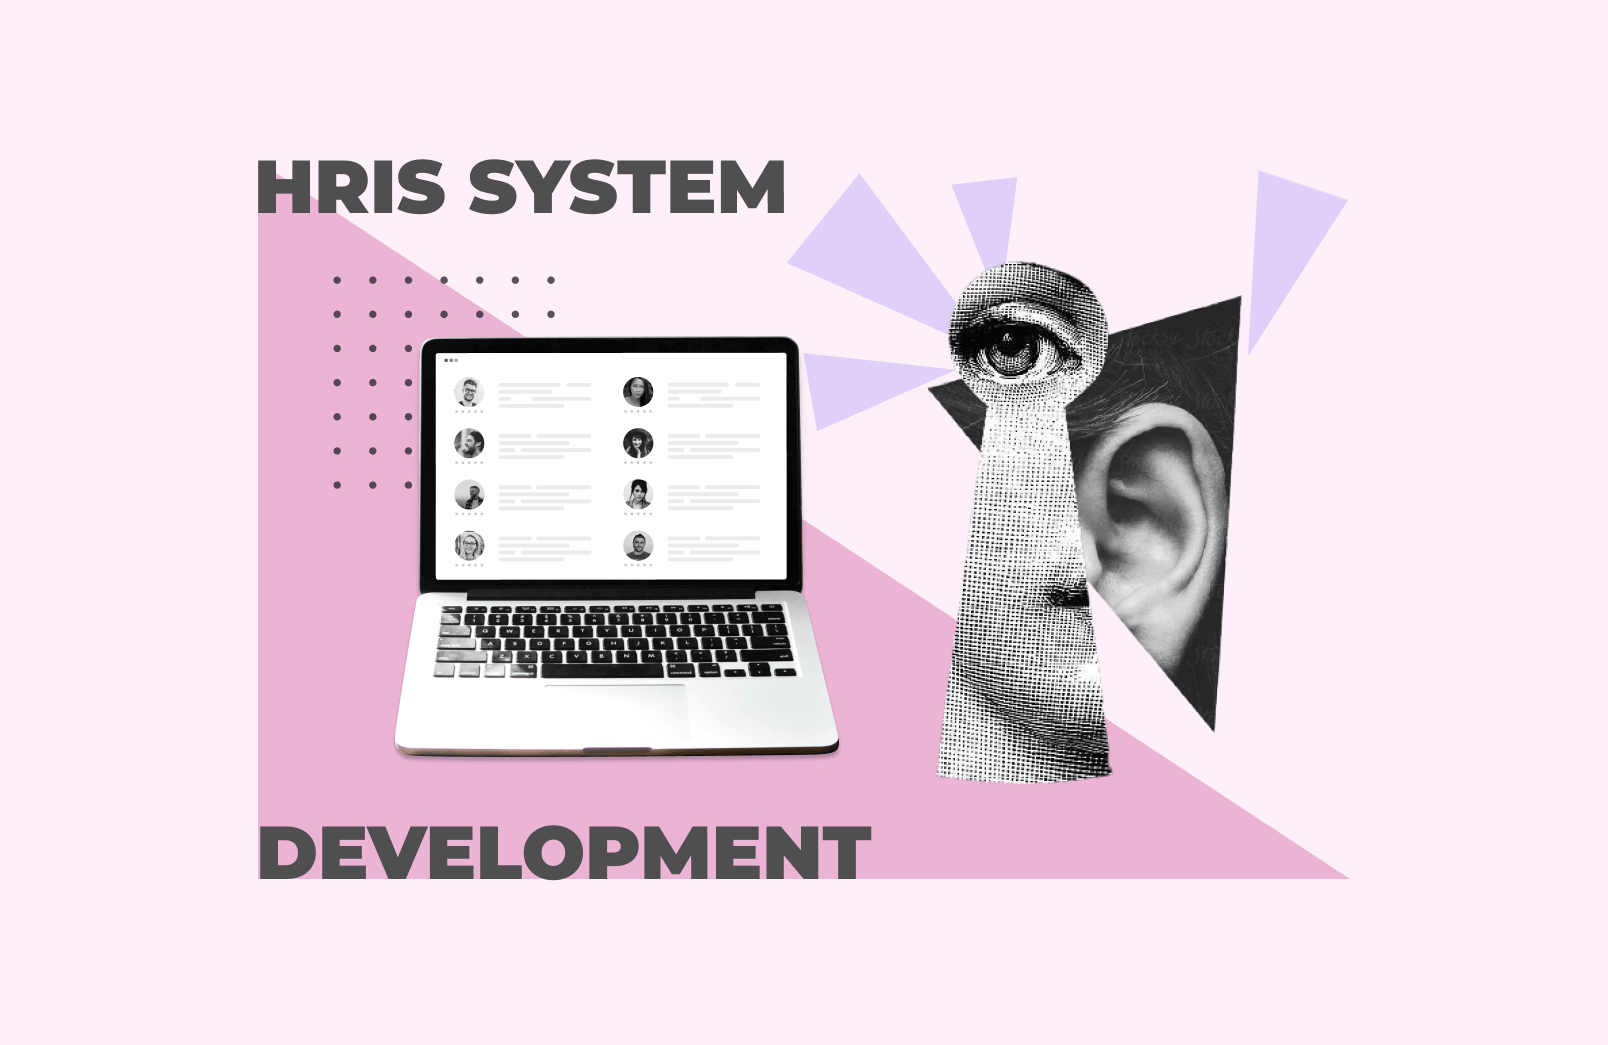 Development of HRIS: How to Build a Human Resources Information System